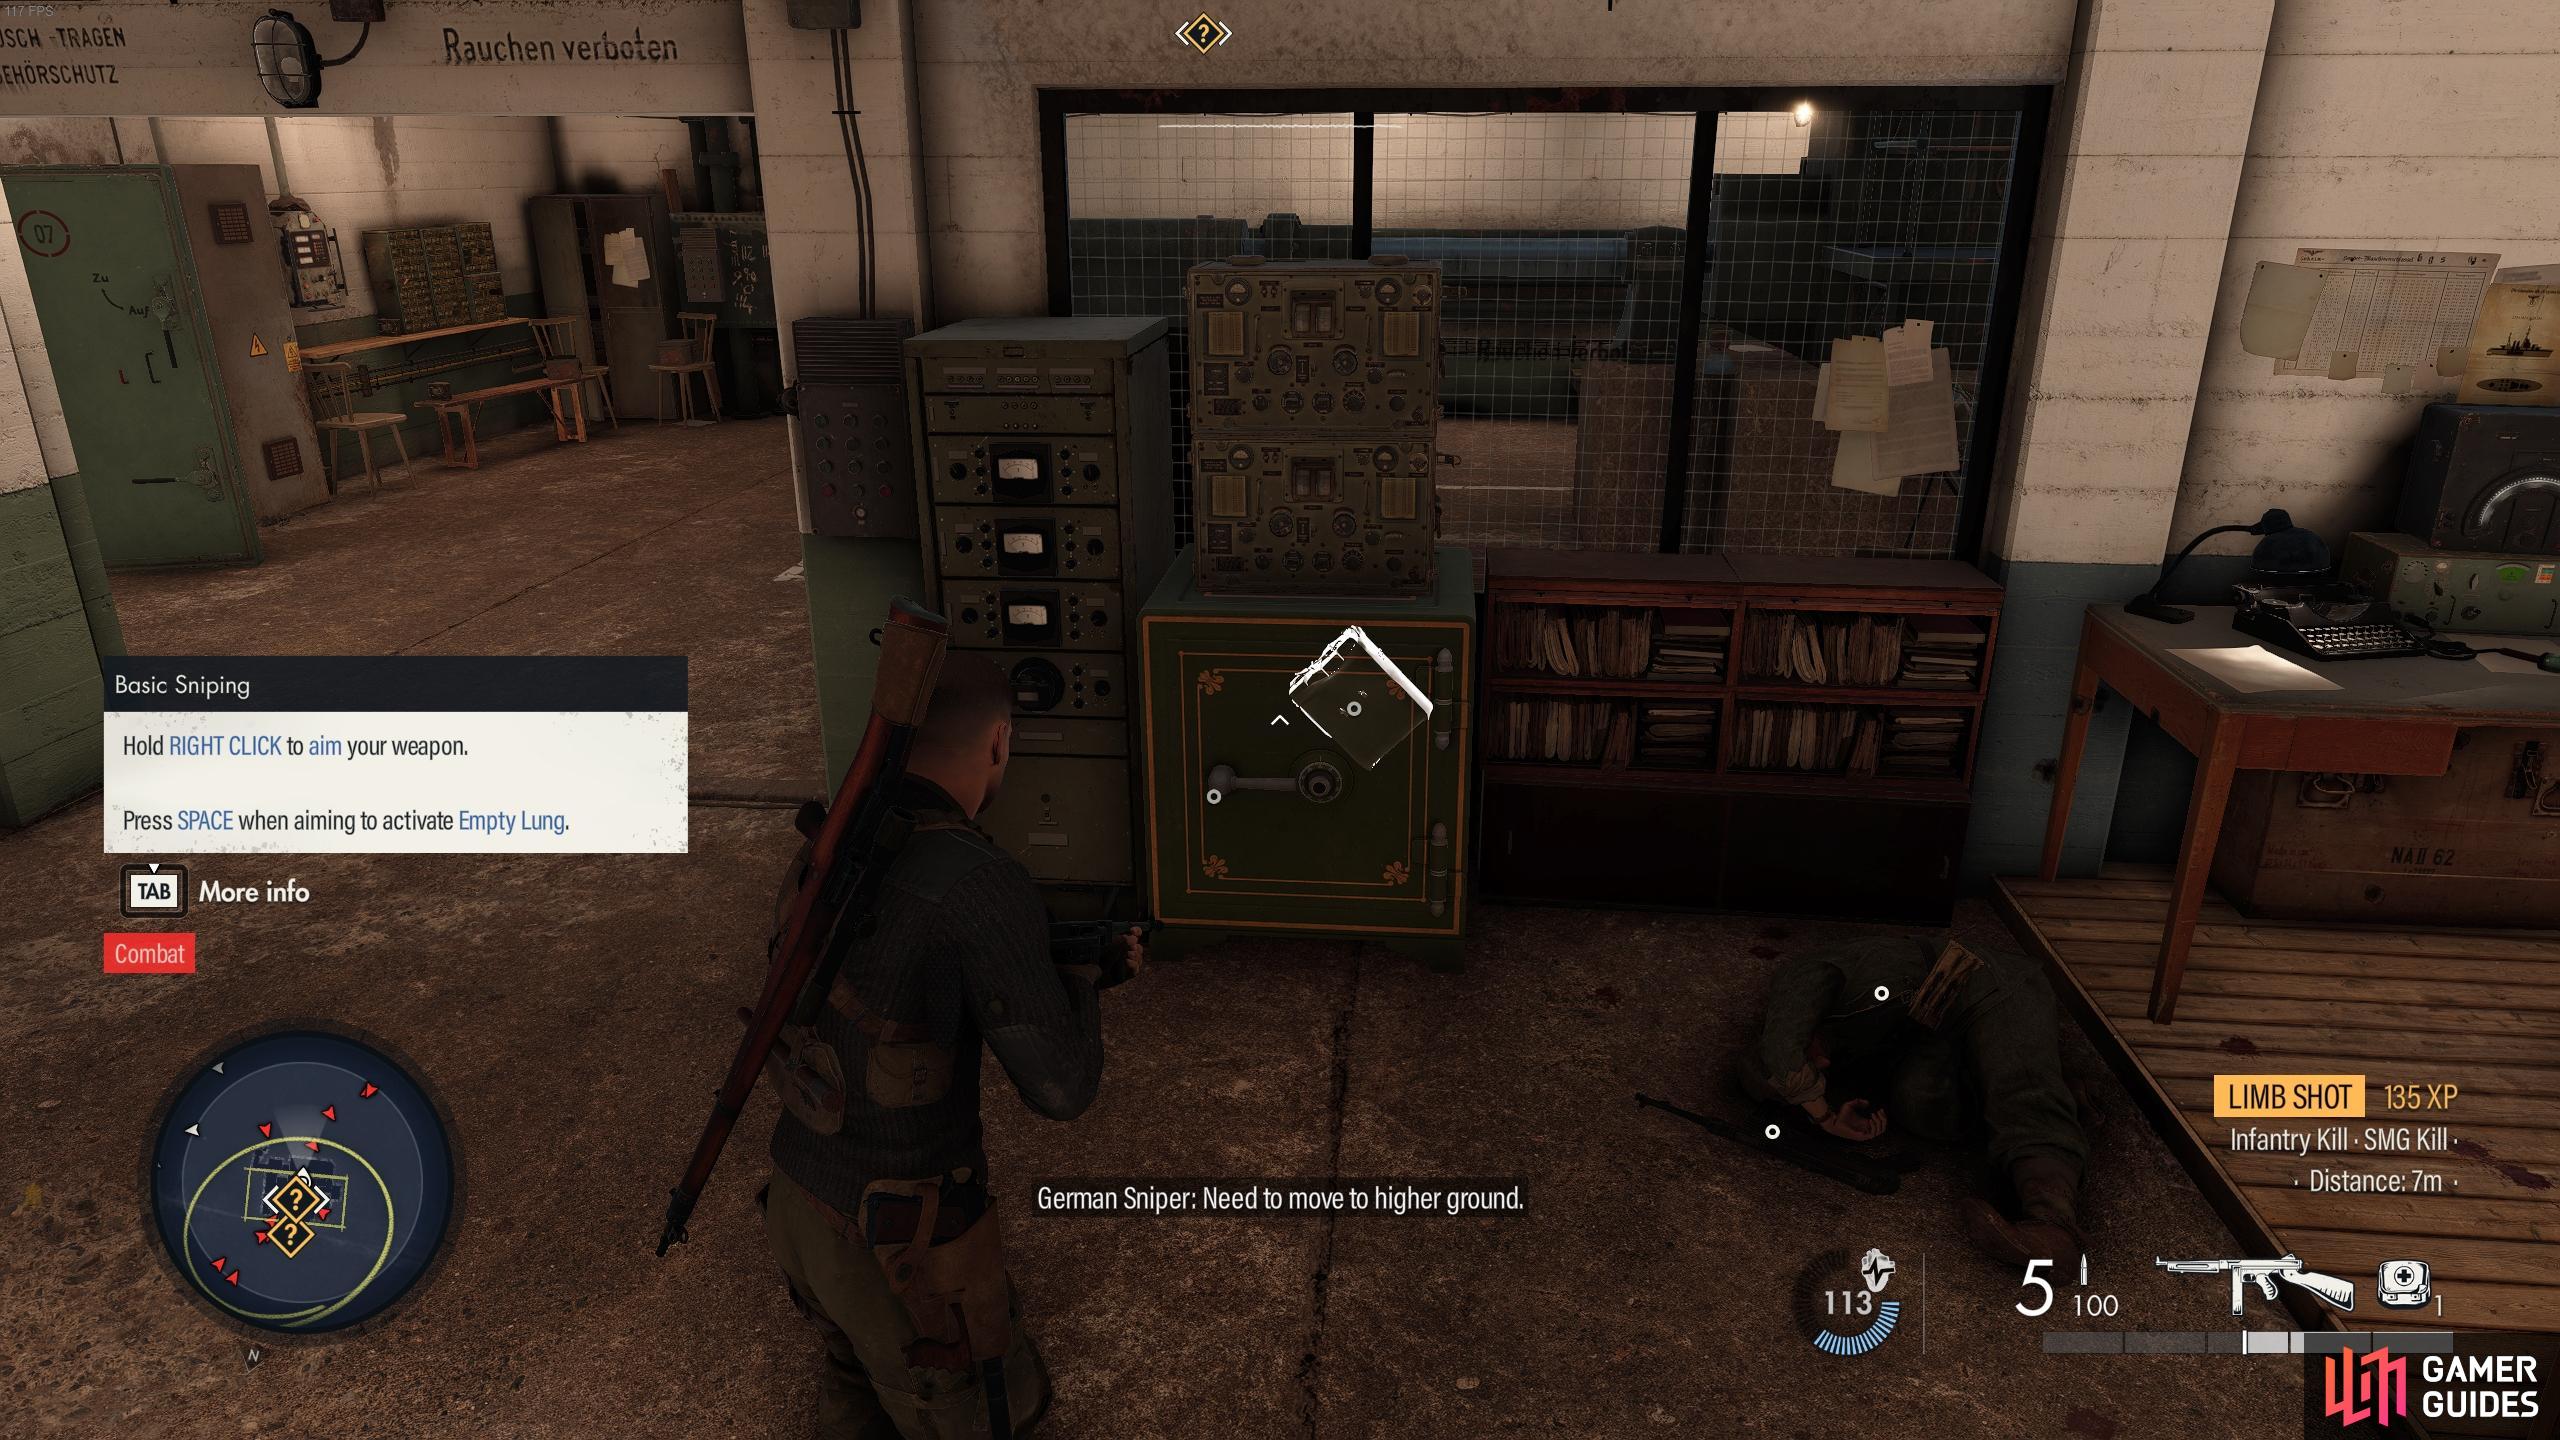 You’ll find the document within the safe chest near the generator room.